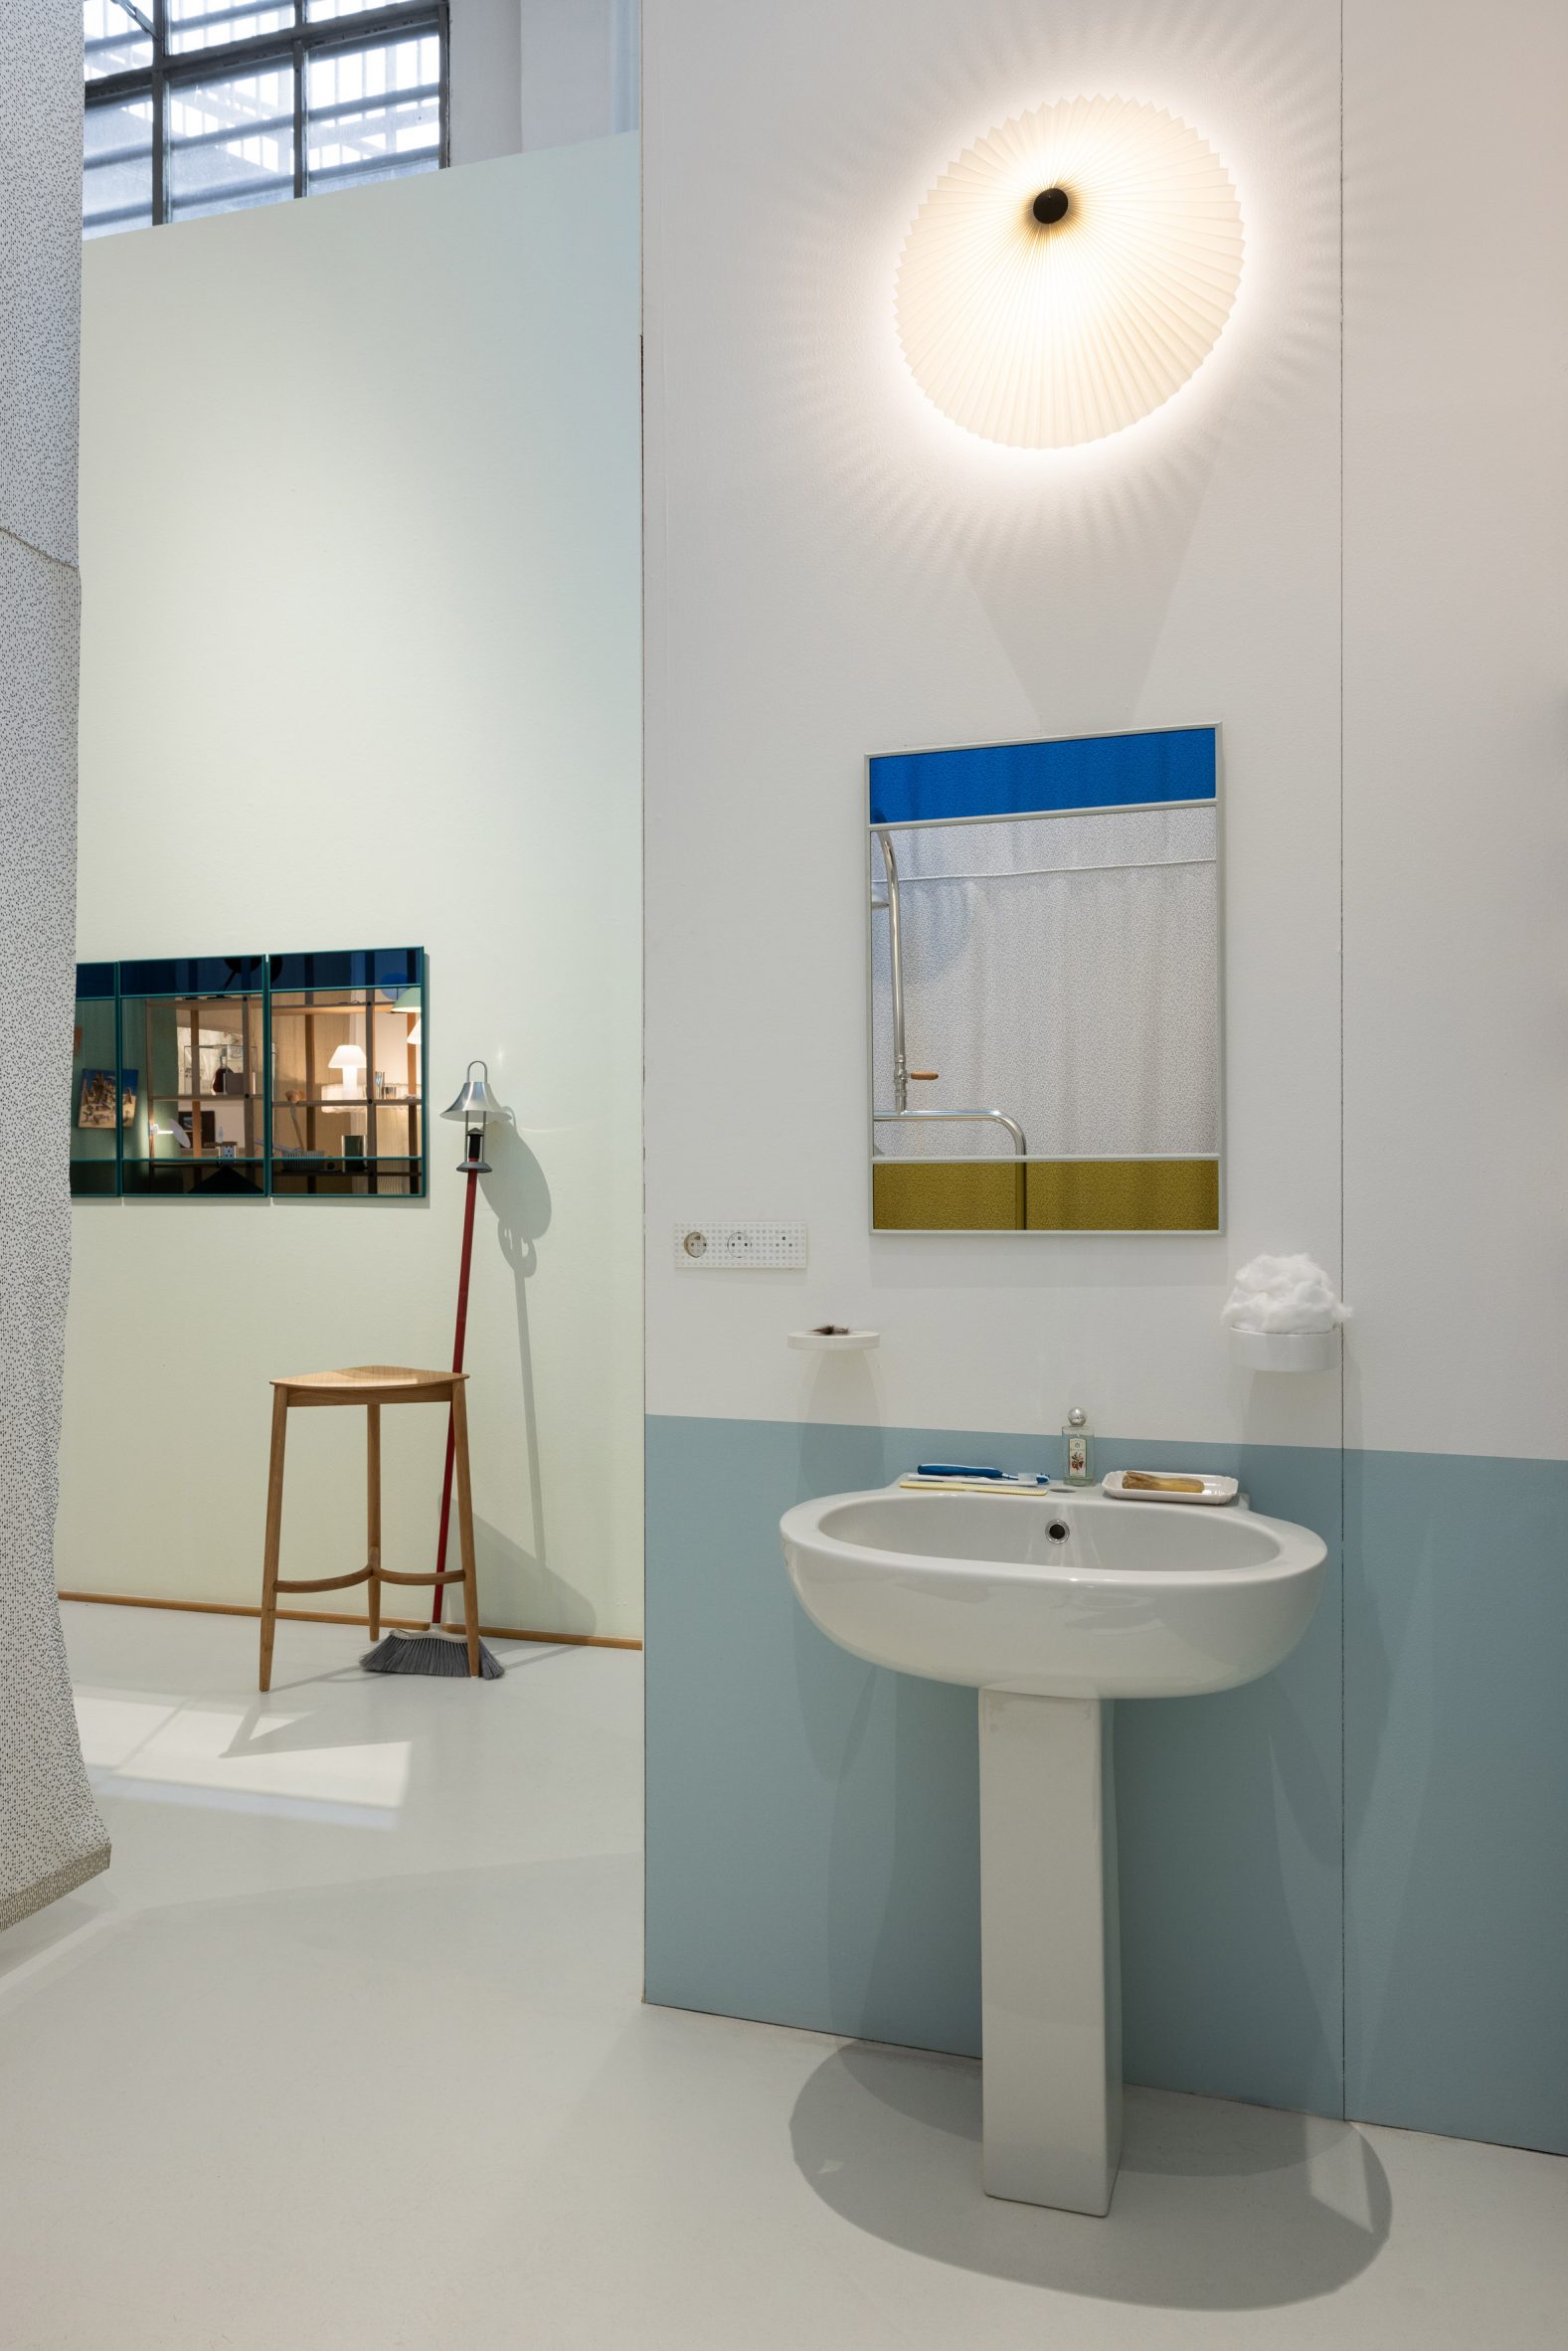 Bathroom in The Imperfect Home by Inga Sempé at Triennale Milano